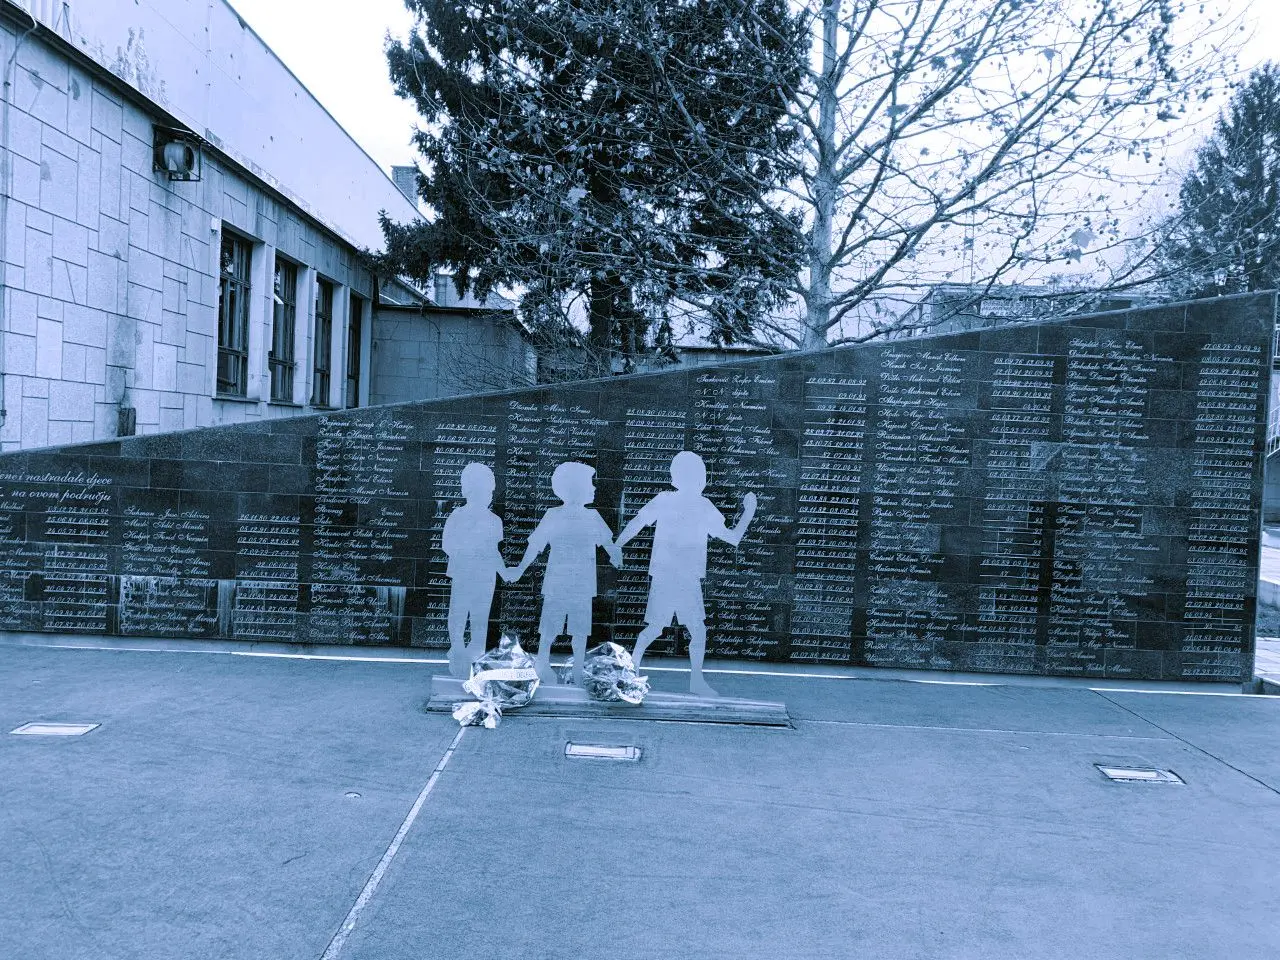 Blue-tinted photo of a memorial wall with names engraved on it. Silhouette statues of children stand in front of the wall.